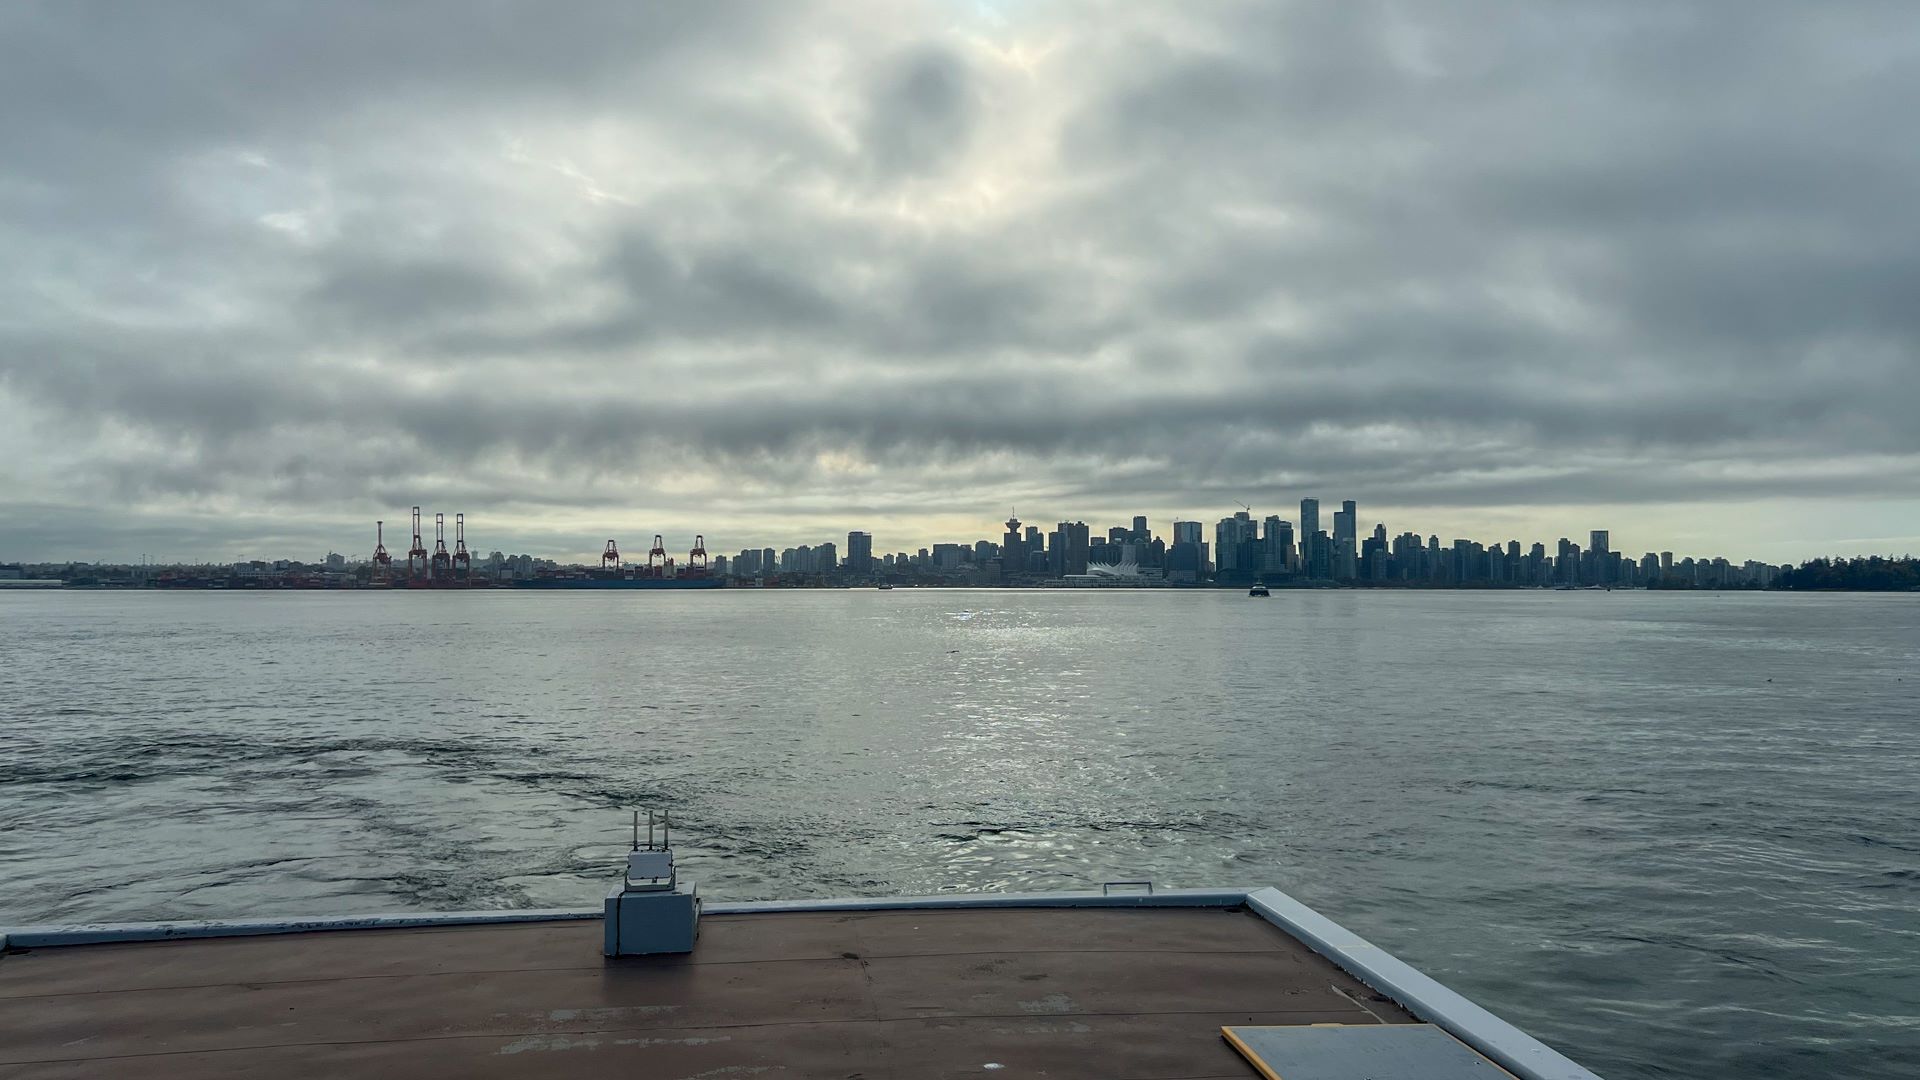 View of downtown Vancouver from the bridge of the Burrard Beaver SeaBus vessel